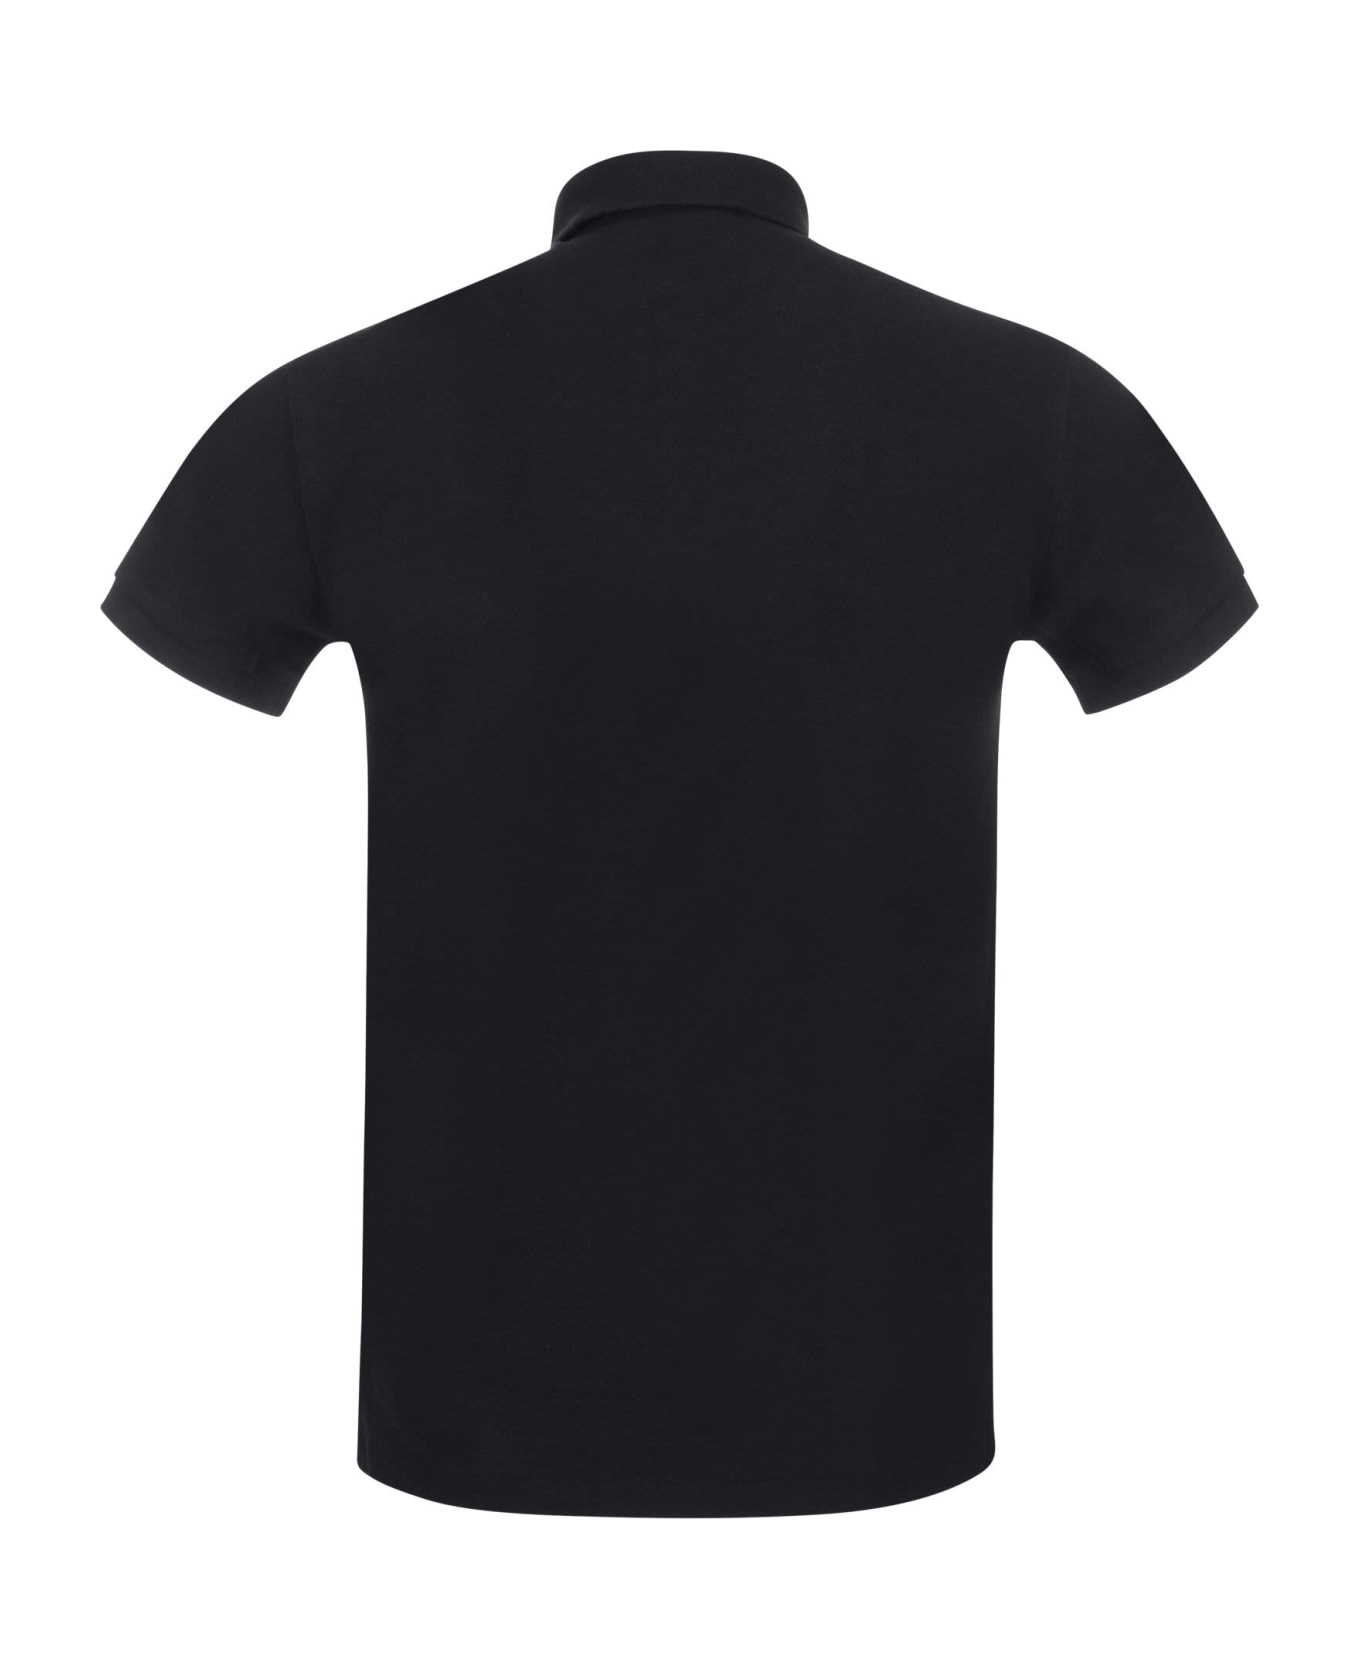 Polo Ralph Lauren Black And Red Slim-fit Pique Polo Shirt - 006